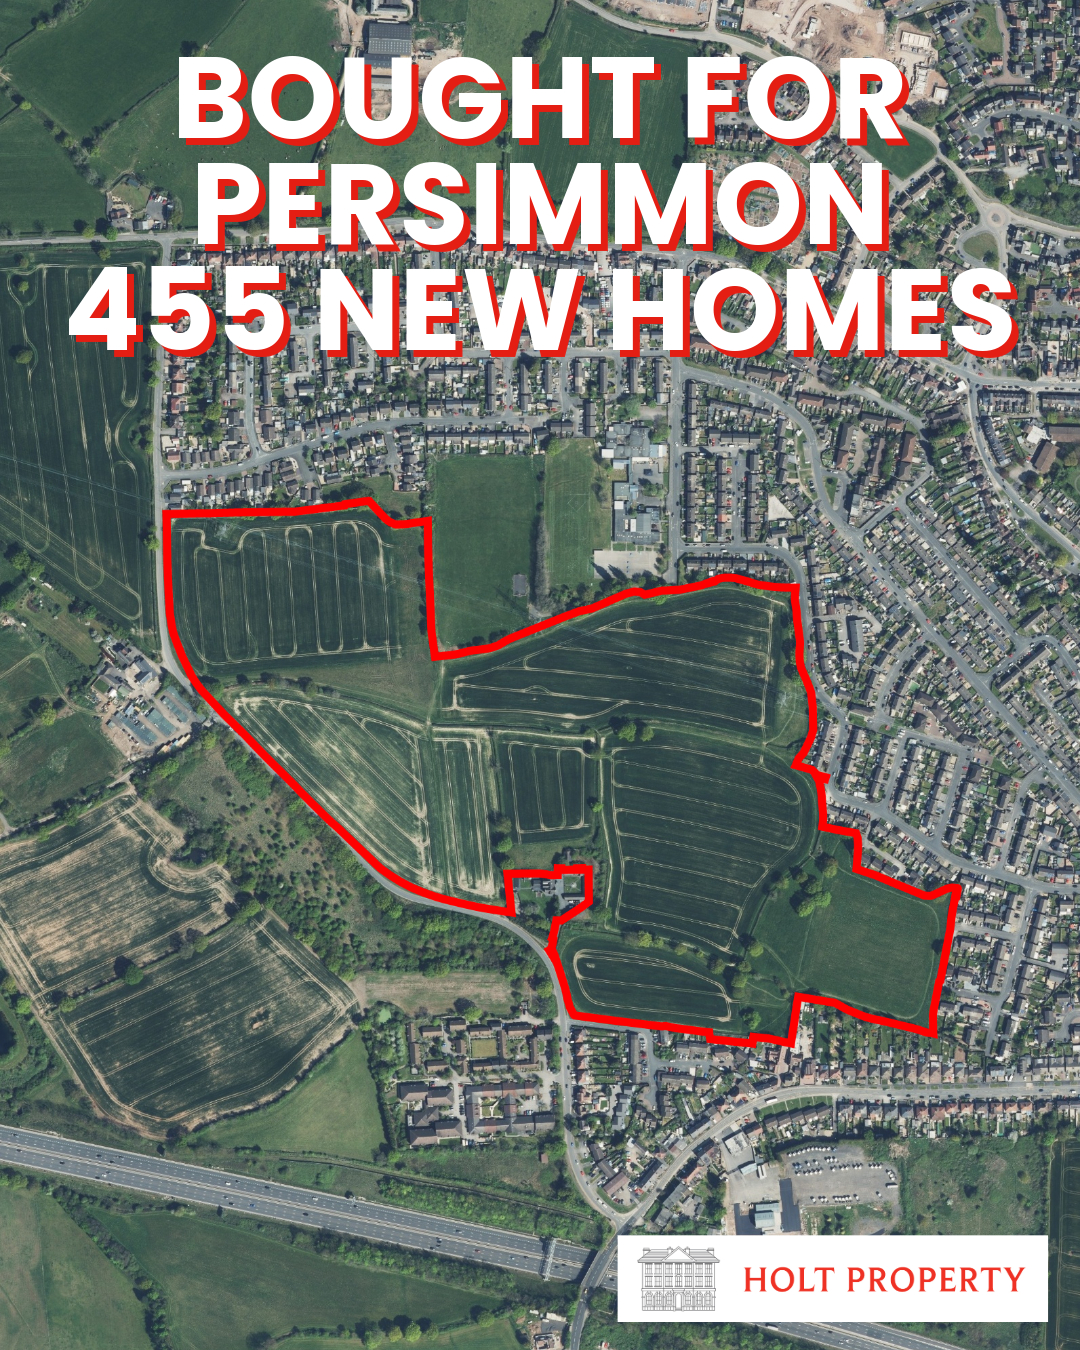 Holt Property Secures 455 Homes & 55 Senior Living Units for Persimmon Homes